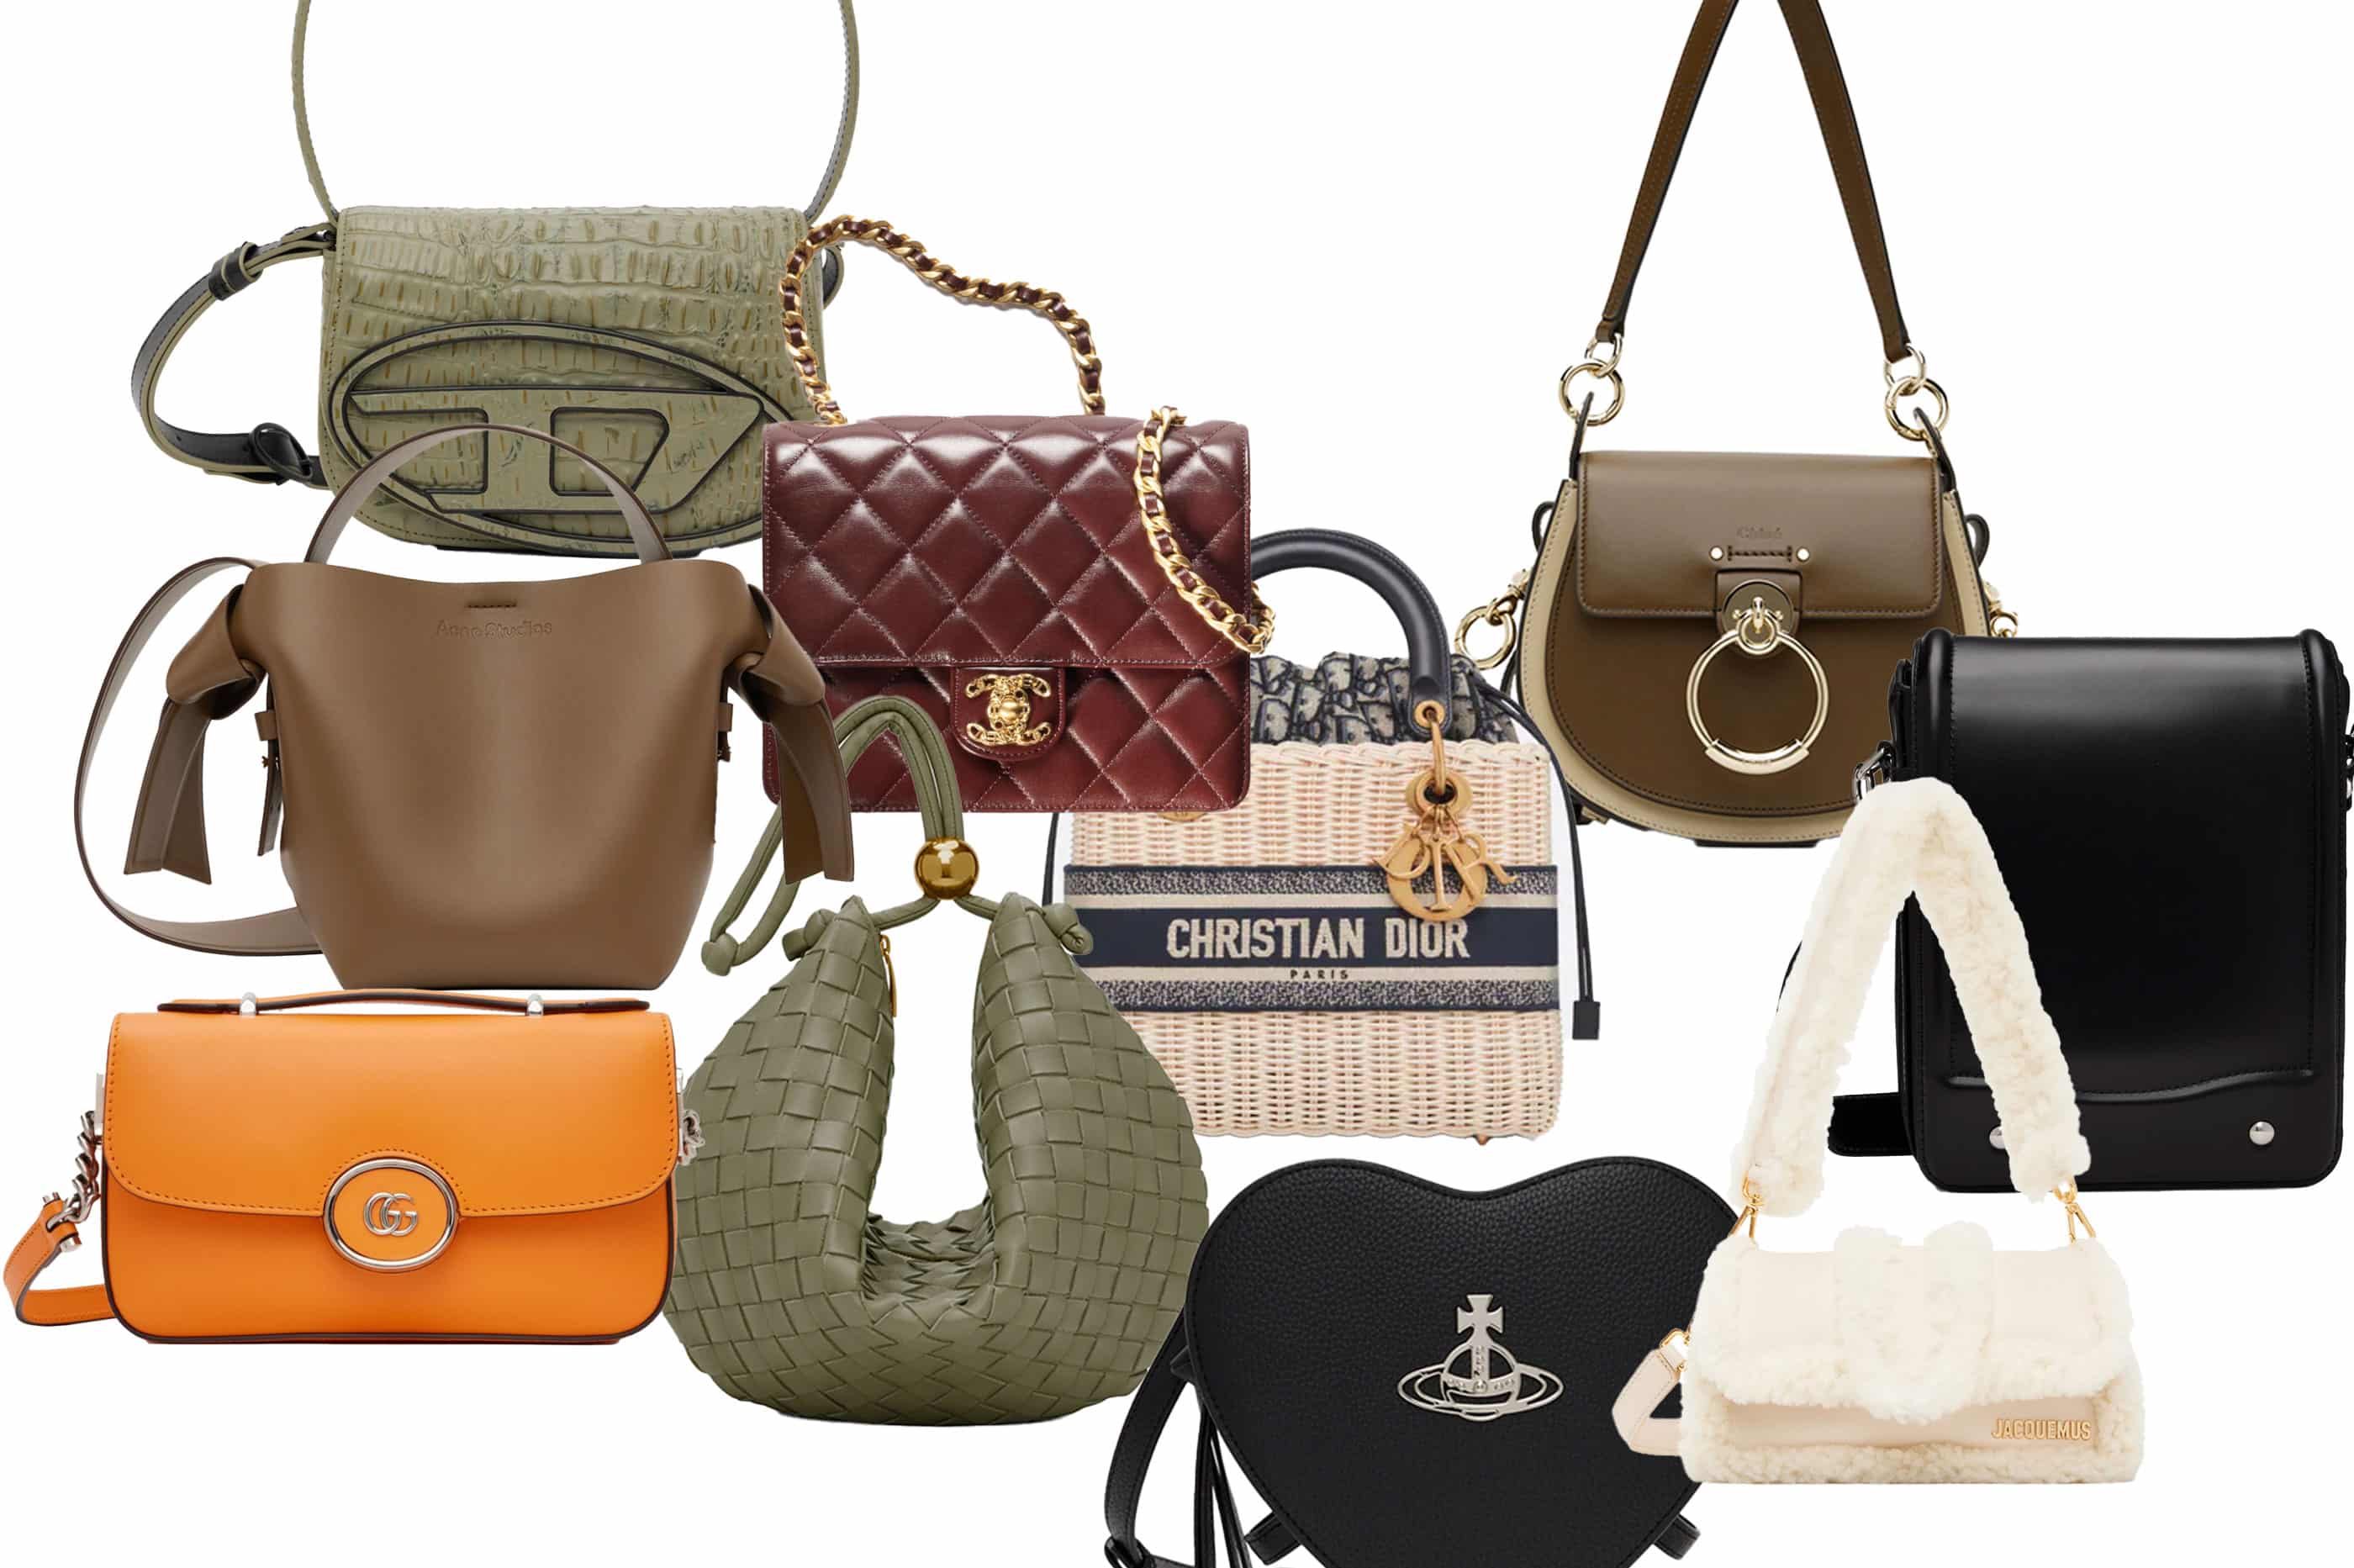 8 of the best places to buy new and vintage designer bags - RUSSH